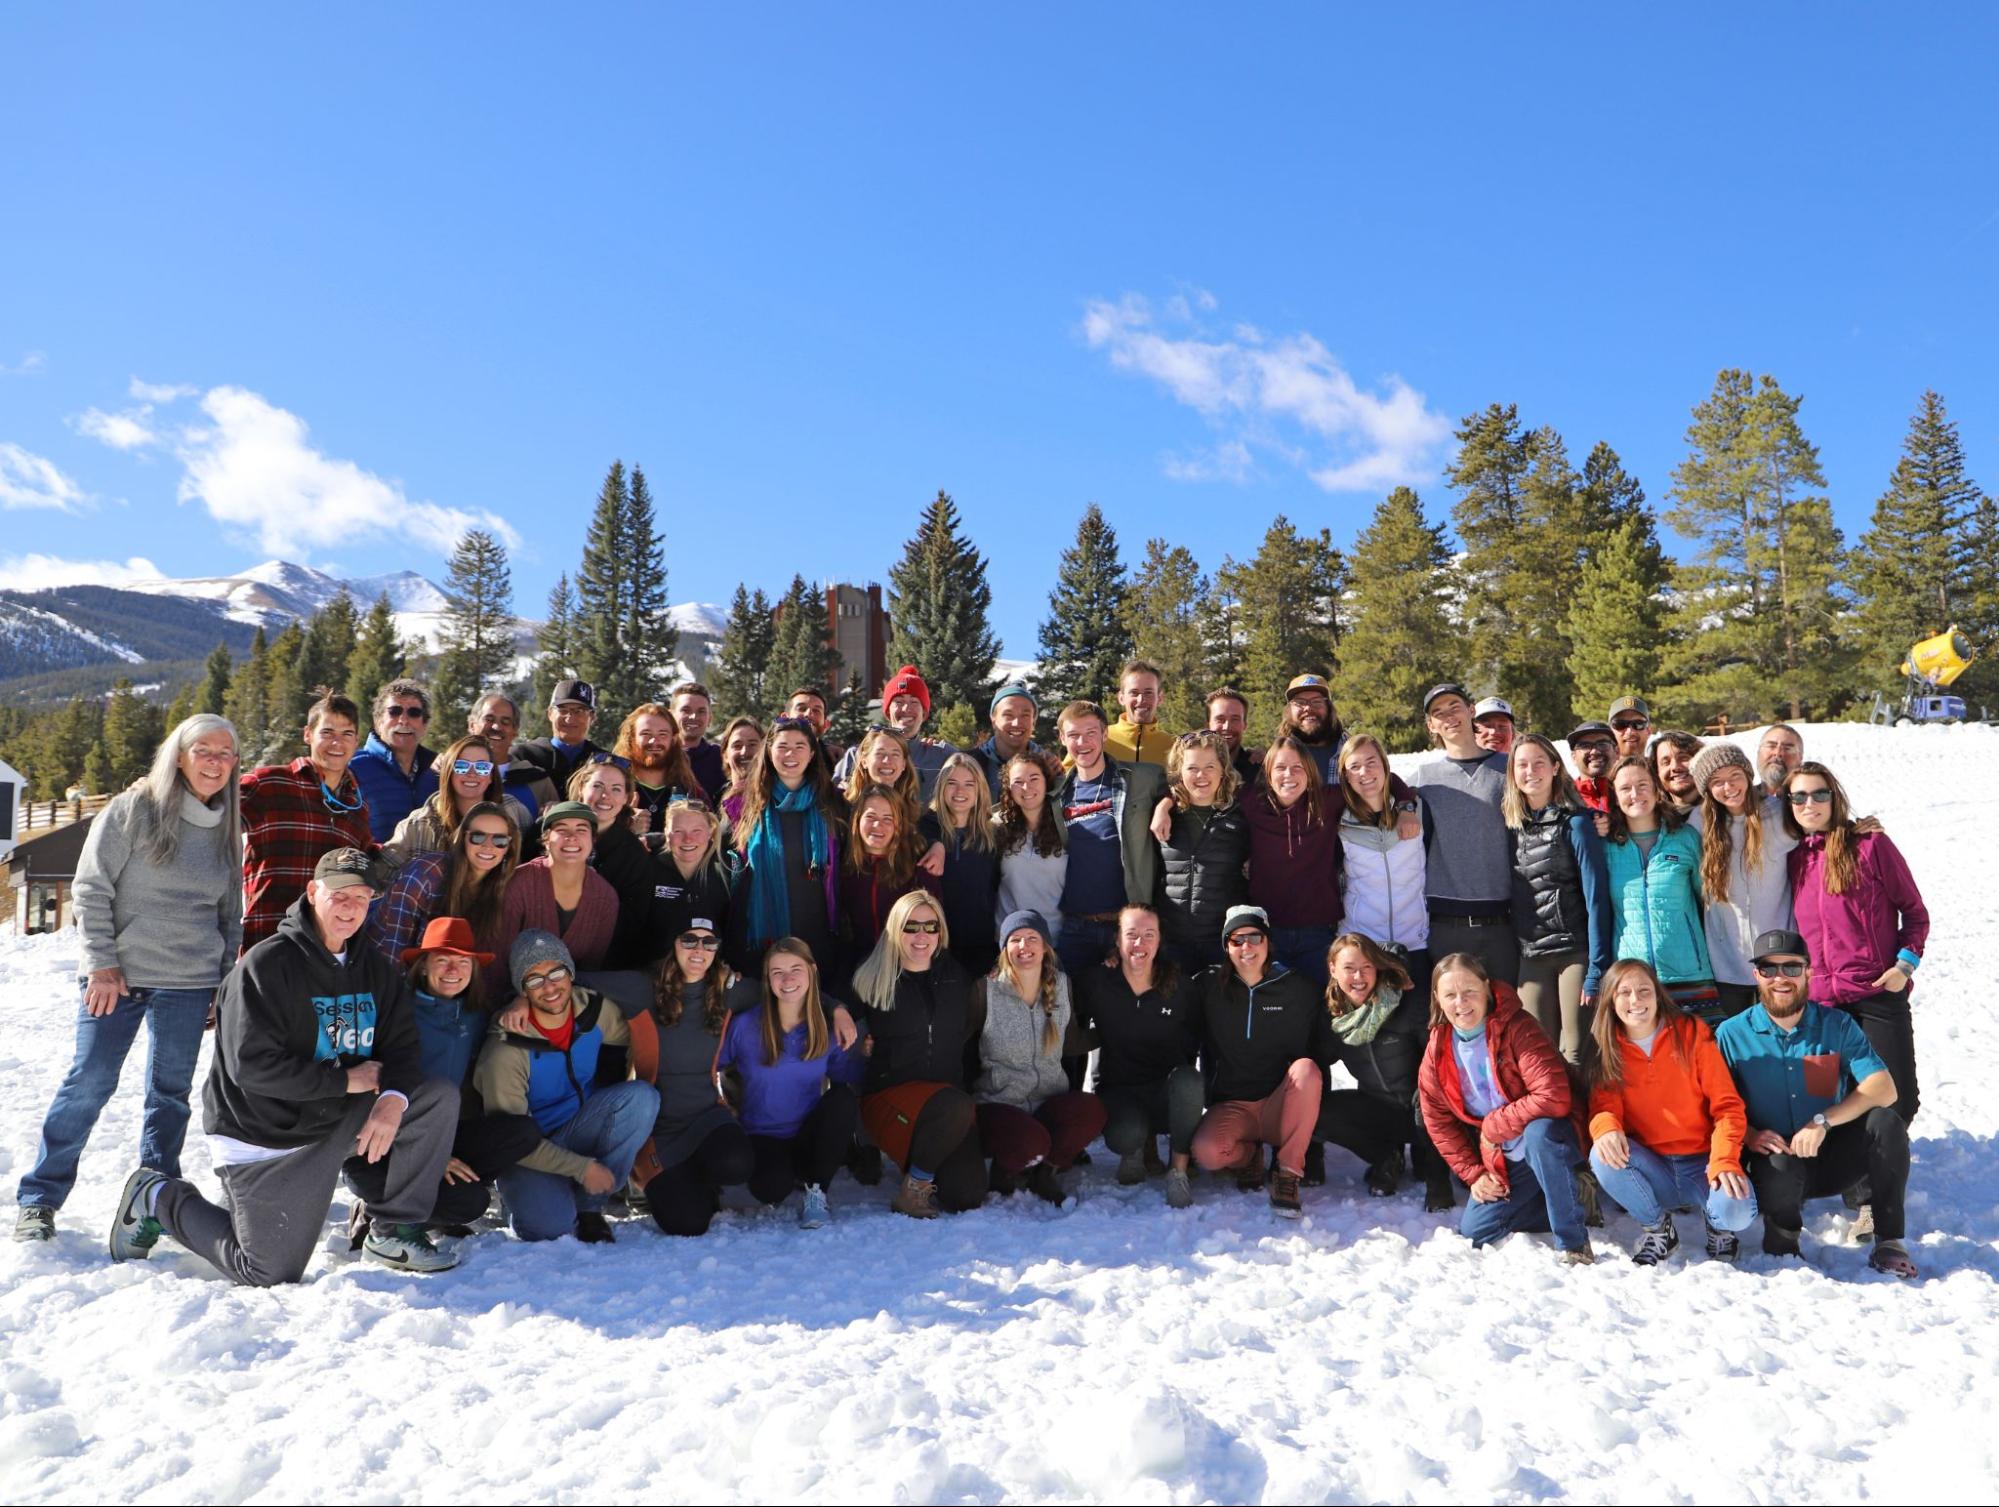 Winter 2019/2020 team with whom Rob and Sarah spent their winter in Breckenridge.